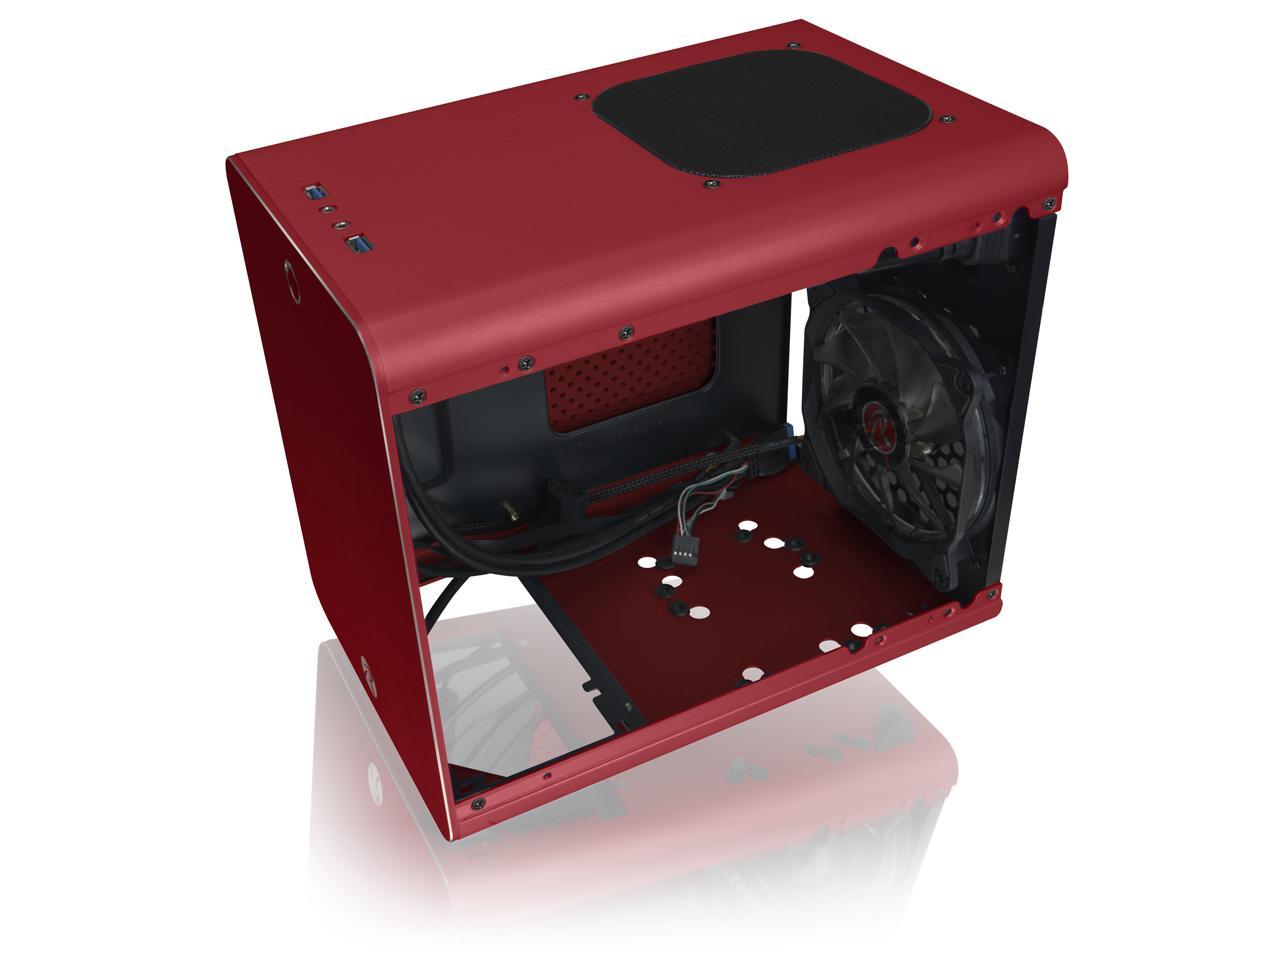 RAIJINTEK METIS PLUS RED, a Alu. M-ITX Case, USB 3.0* 2, Compatible with Standard ATX Power Supply, 170mm VGA Card Length, 160mm CPU Cooler Height, 12025 White LED Fan Installed, ventilate hole on top